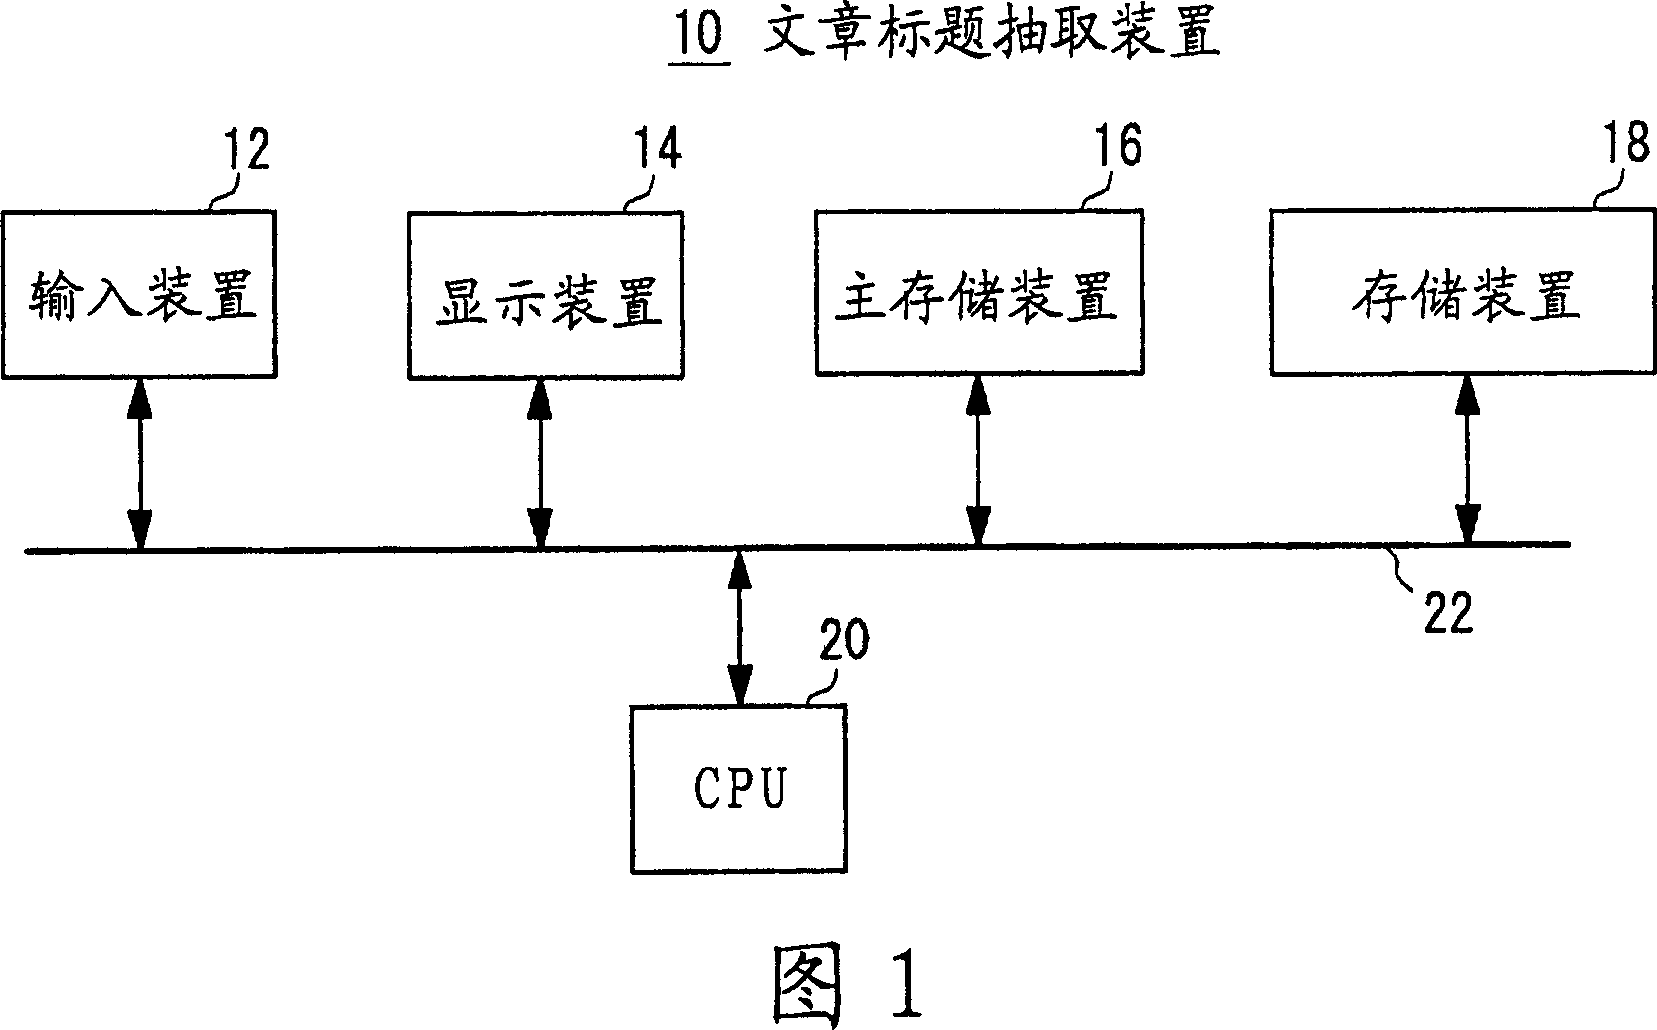 Automatic extraction device, method and program of essay title and correlation information